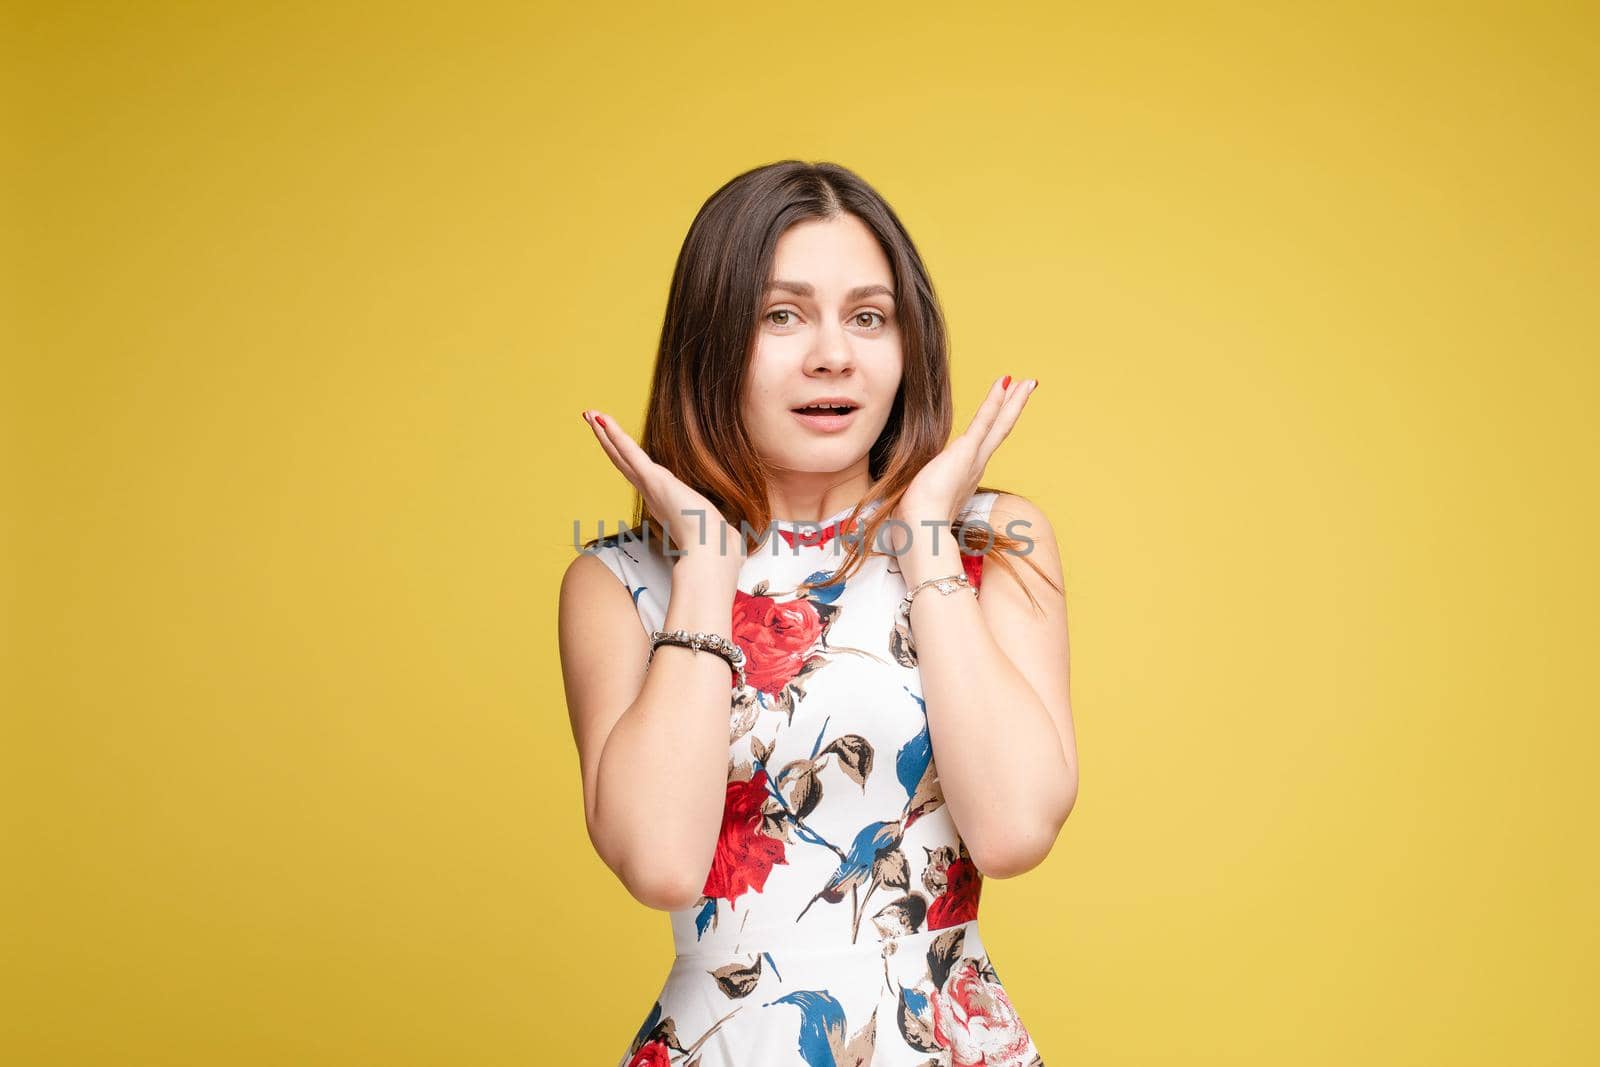 Front view of surprised young girl in bright dress looking at camera on yellow isolated background in studio. Funny amazed female with open eyes shouting. Concept of shock and happiness.